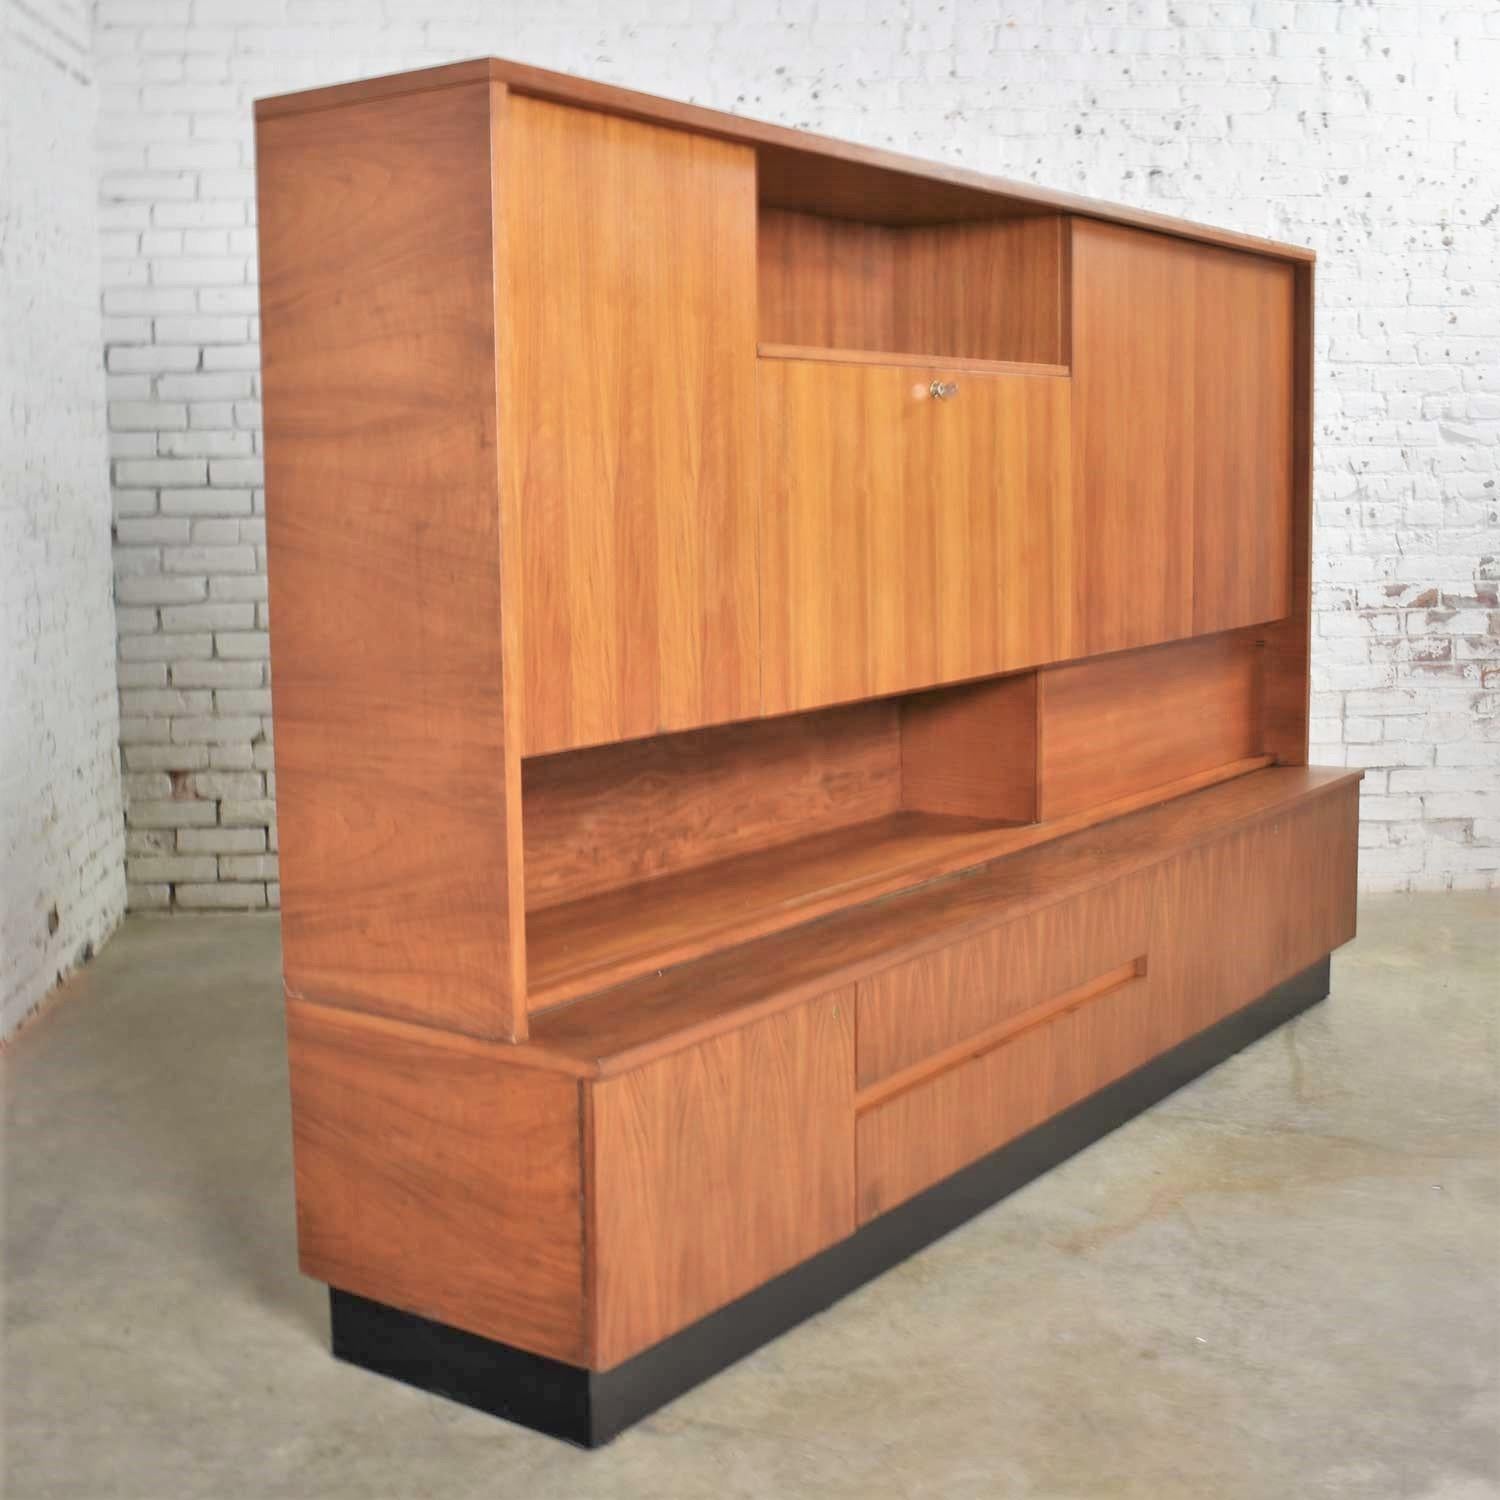 Laminate Teak Mid-Century Modern Wall Storage Bookcase Cabinet with Drop Front Desk For Sale